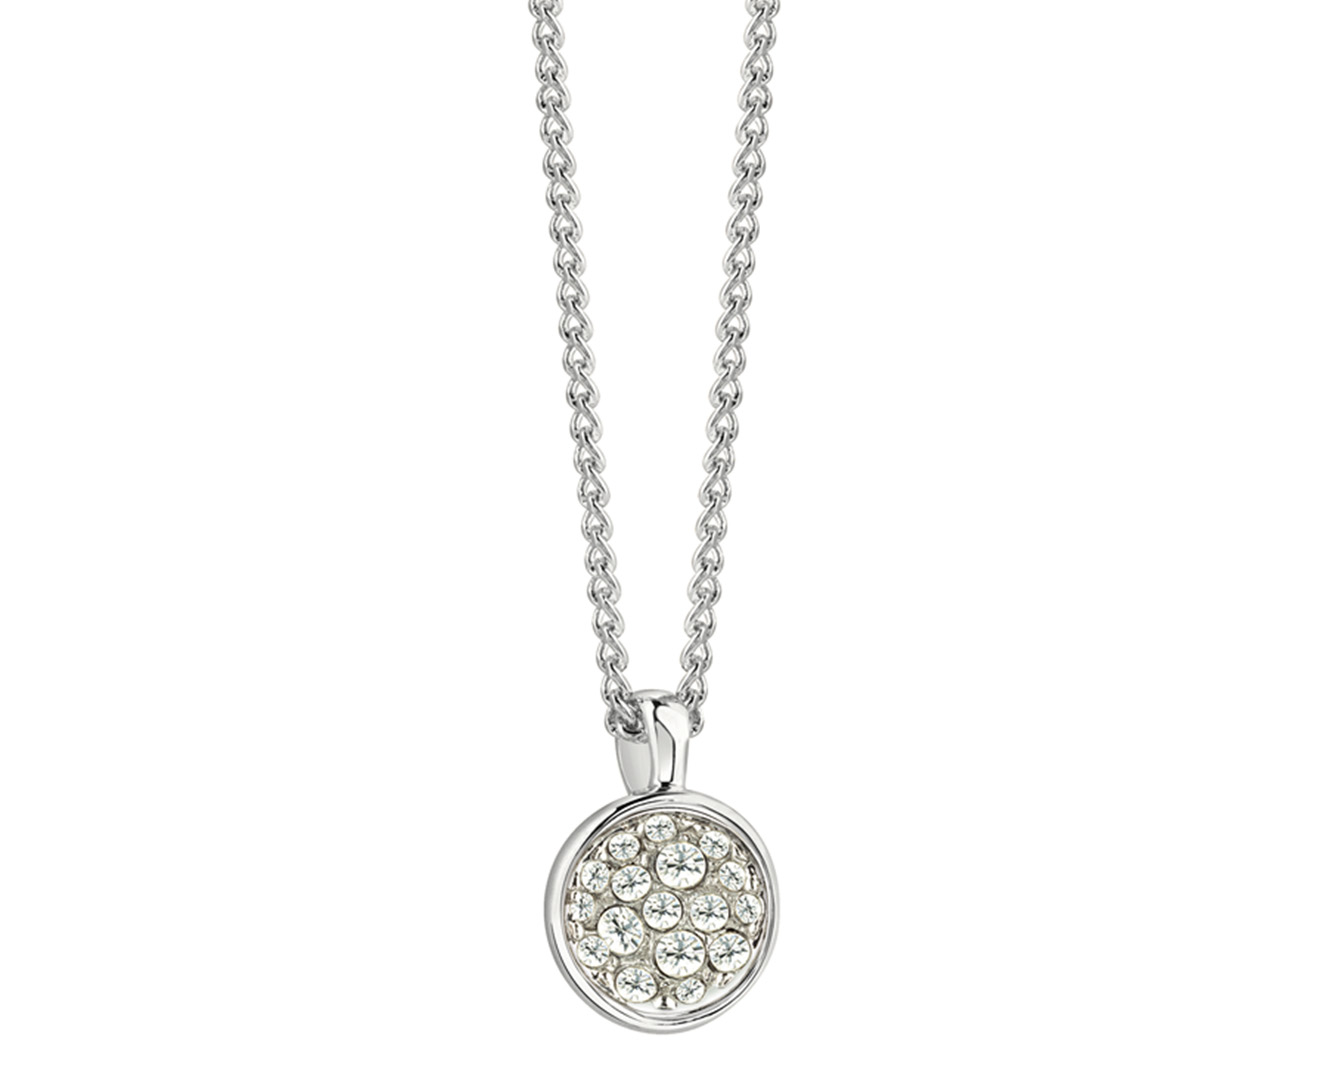 GUESS Chic Pendant Necklace - Silver | Catch.co.nz